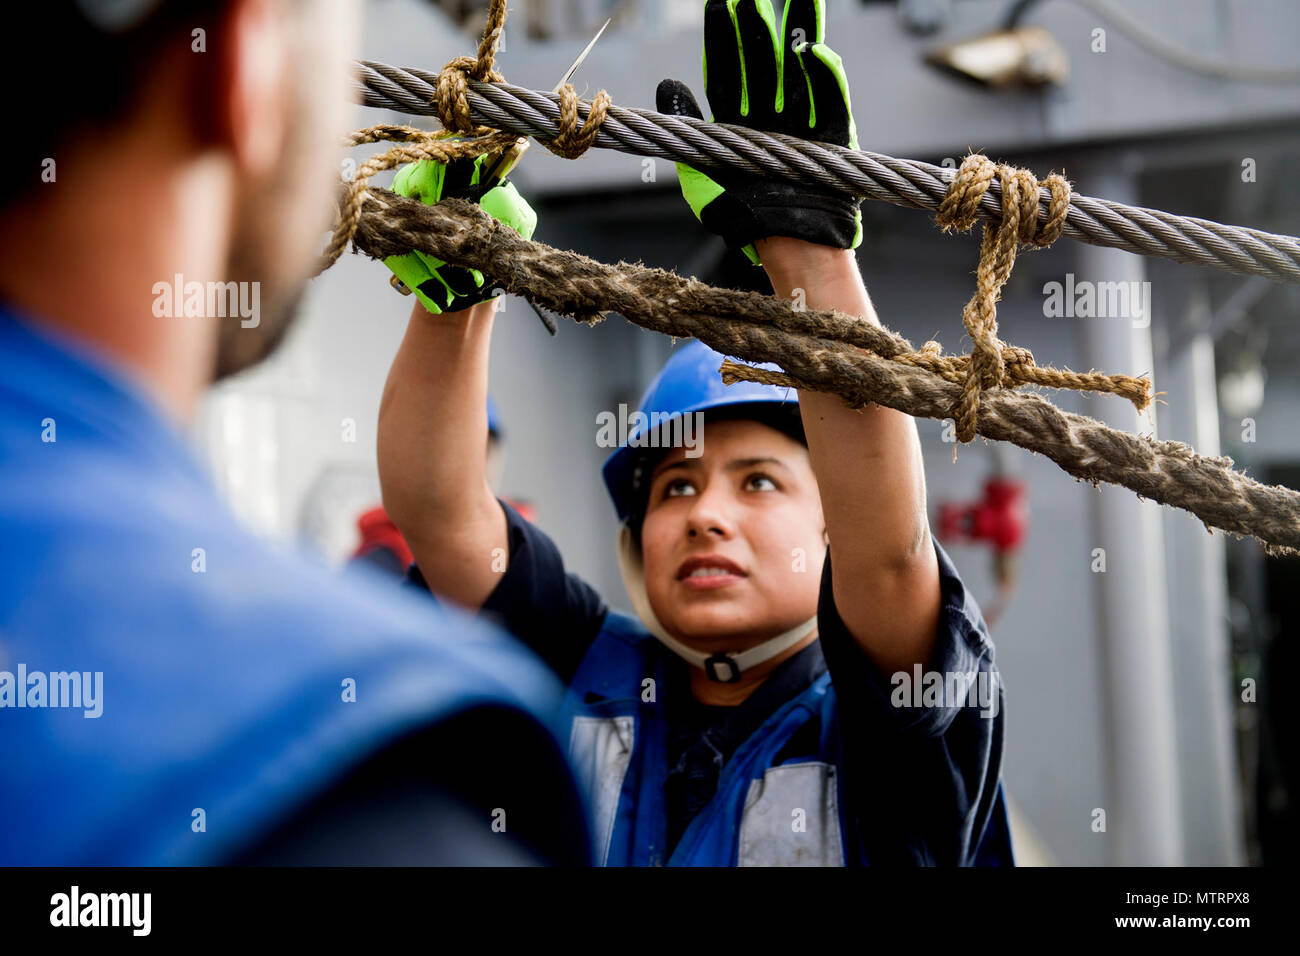 170118-N-FT178-078 PACIFIC OCEAN (Jan. 18, 2017) Boatswain's Mate Seaman Apprentice Athalia Chavez cuts a messenger line from the span wire aboard Ticonderoga-class guided-missile cruiser USS Lake Champlain (CG 57) during a replenishment-at-sea. Lake Champlain is on a regularly scheduled Western Pacific deployment with the Carl Vinson Carrier Strike Group as part of the U.S. Pacific Fleet-led initiative to extend the command and control functions of the U.S. 3rd Fleet in the Indo-Asia-Pacific region. (U.S. Navy photo by Mass Communication Specialist 2nd Class Nathan K. Serpico/Released) Stock Photo